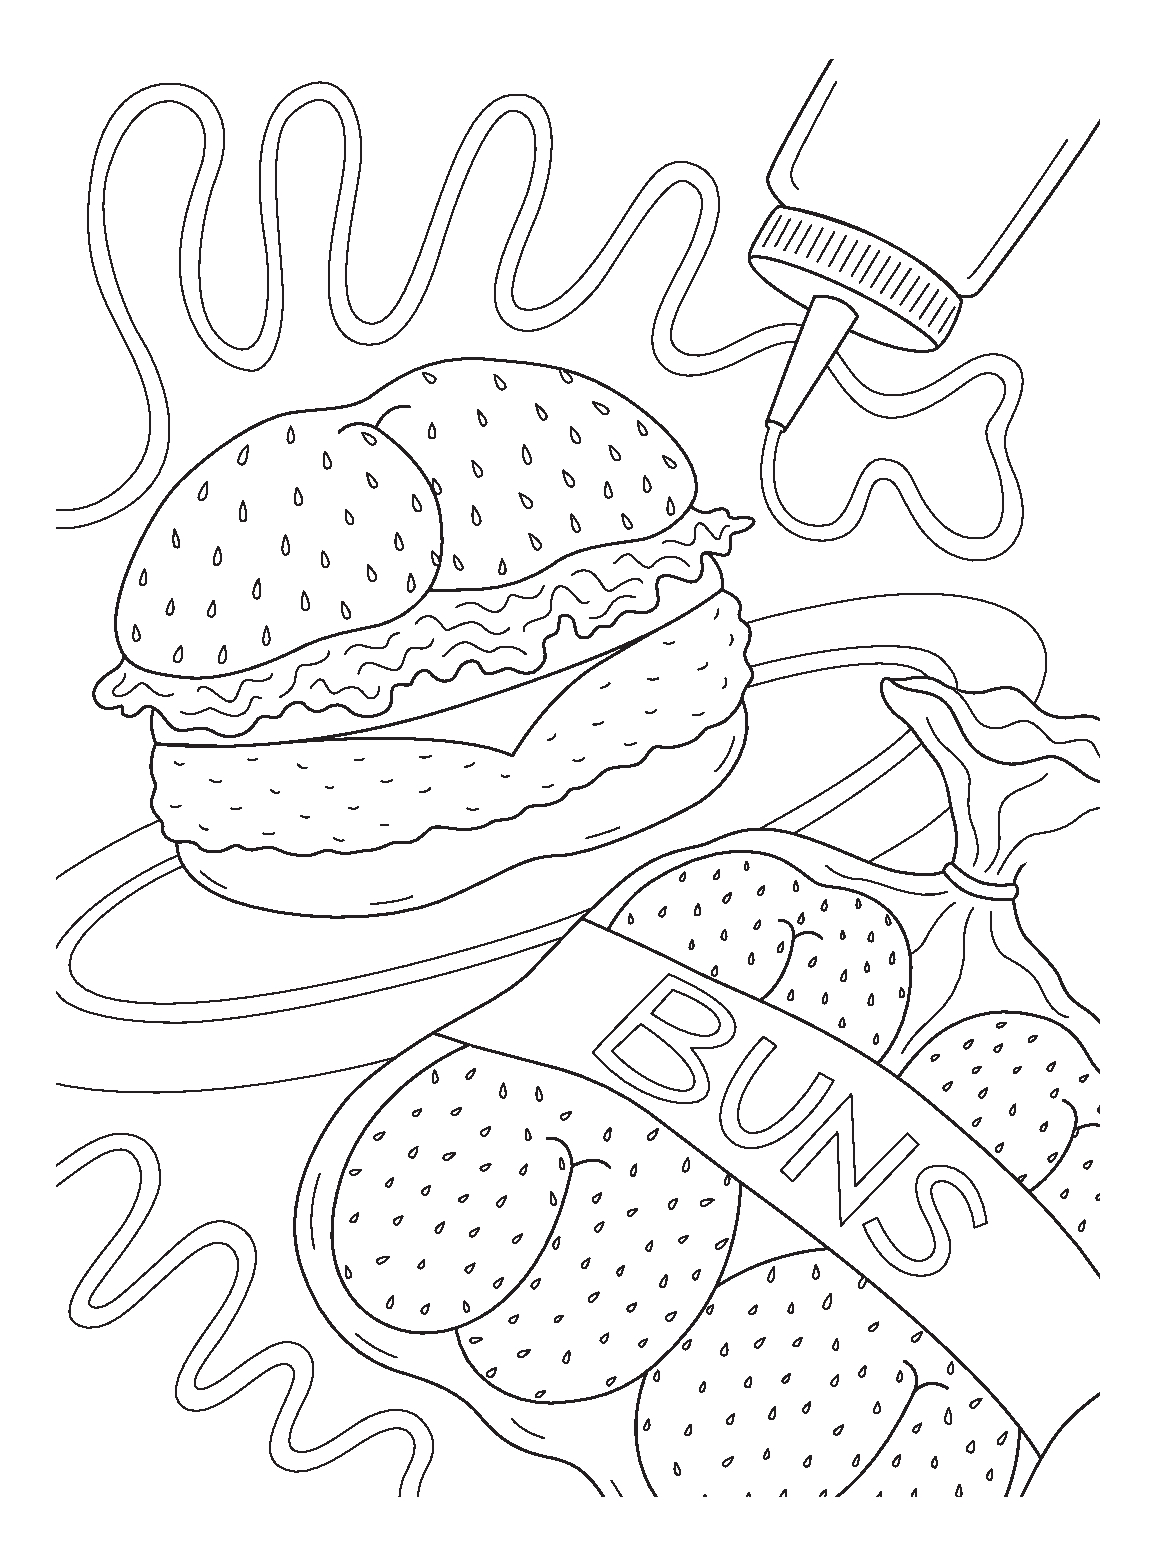 The Ultimate Butt Coloring and Activity Book